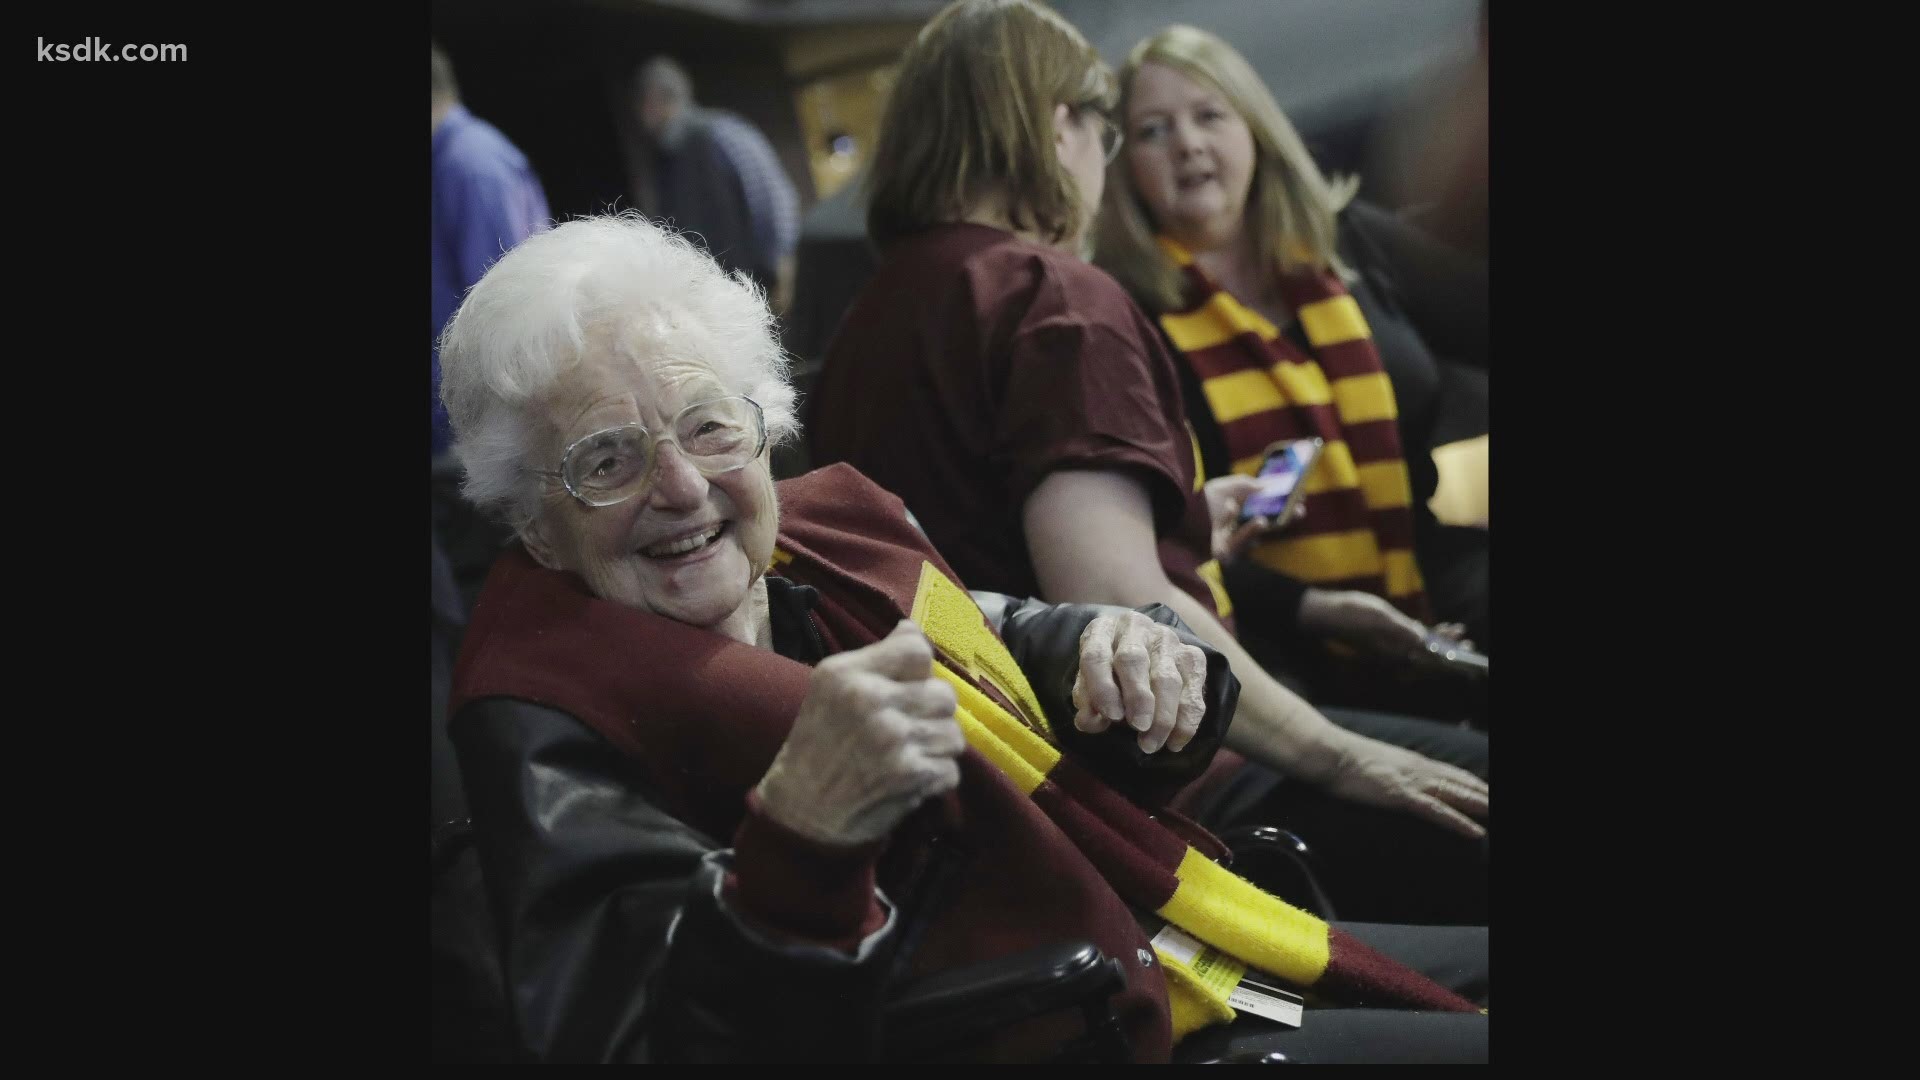 The most famous Loyola basketball fan will be following along on their run in 2021.